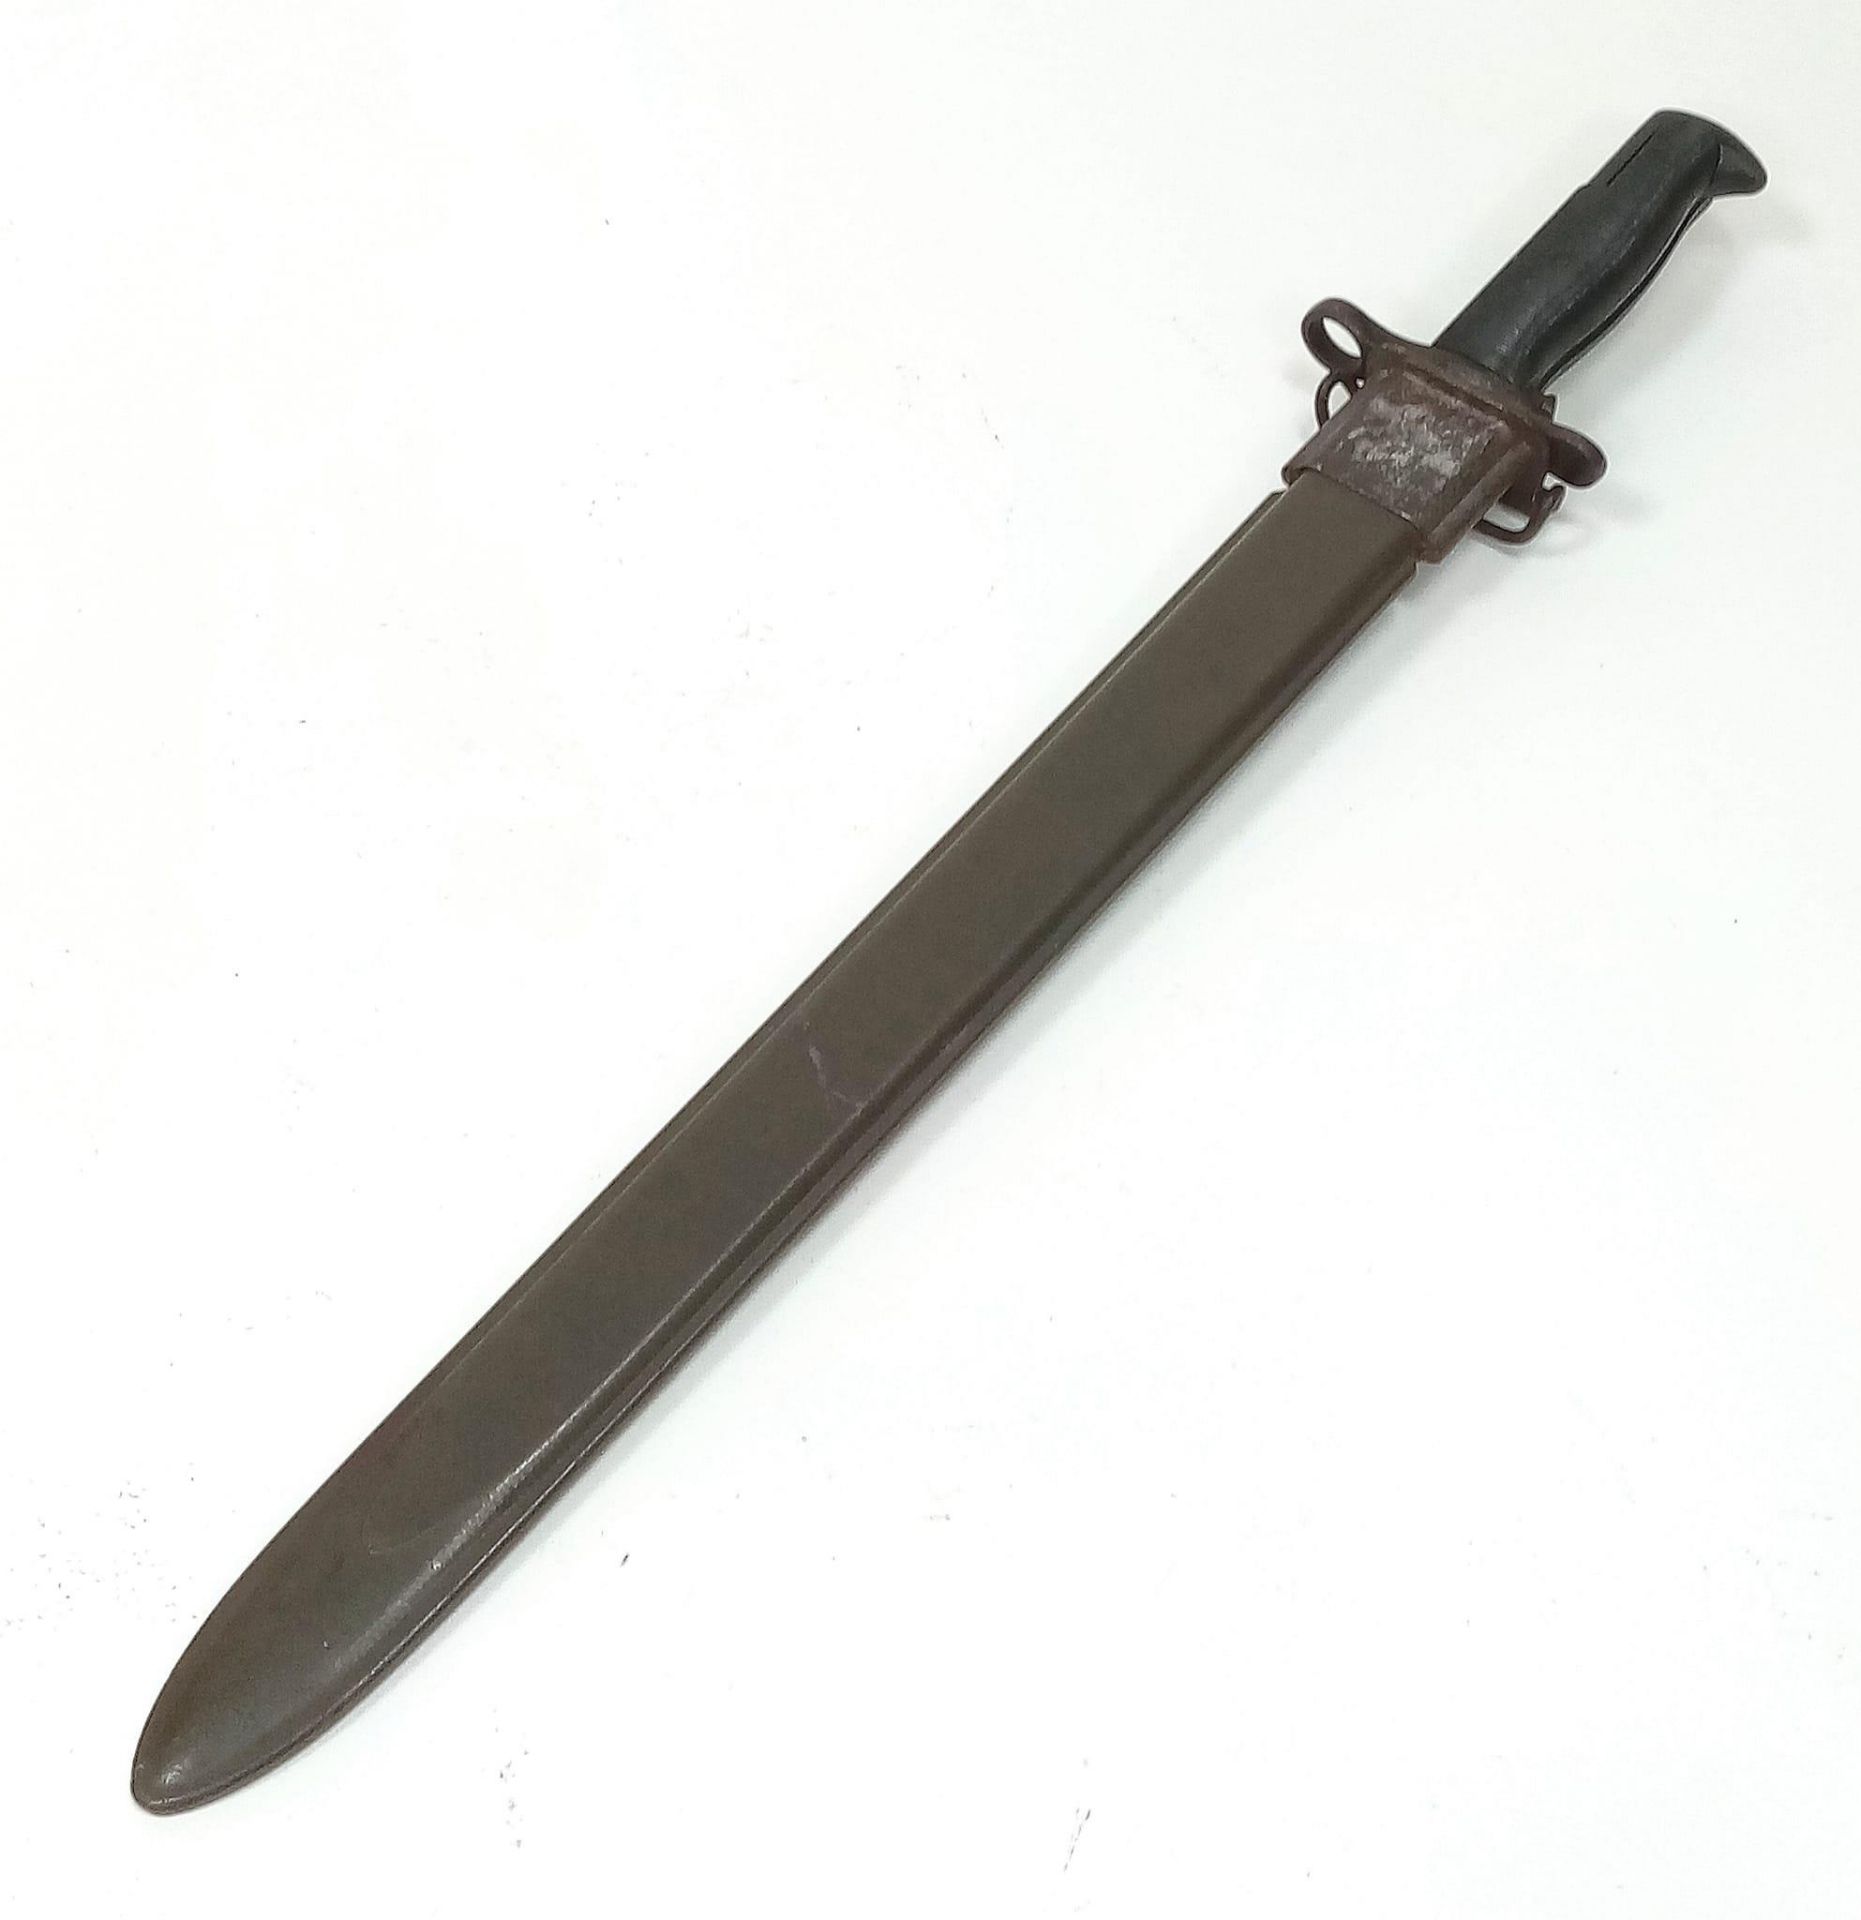 US Springfield Rock Island Arsenal M1905 16” Bayonet Dated 1906 re-issued in 1942 for the Garand - Image 10 of 15